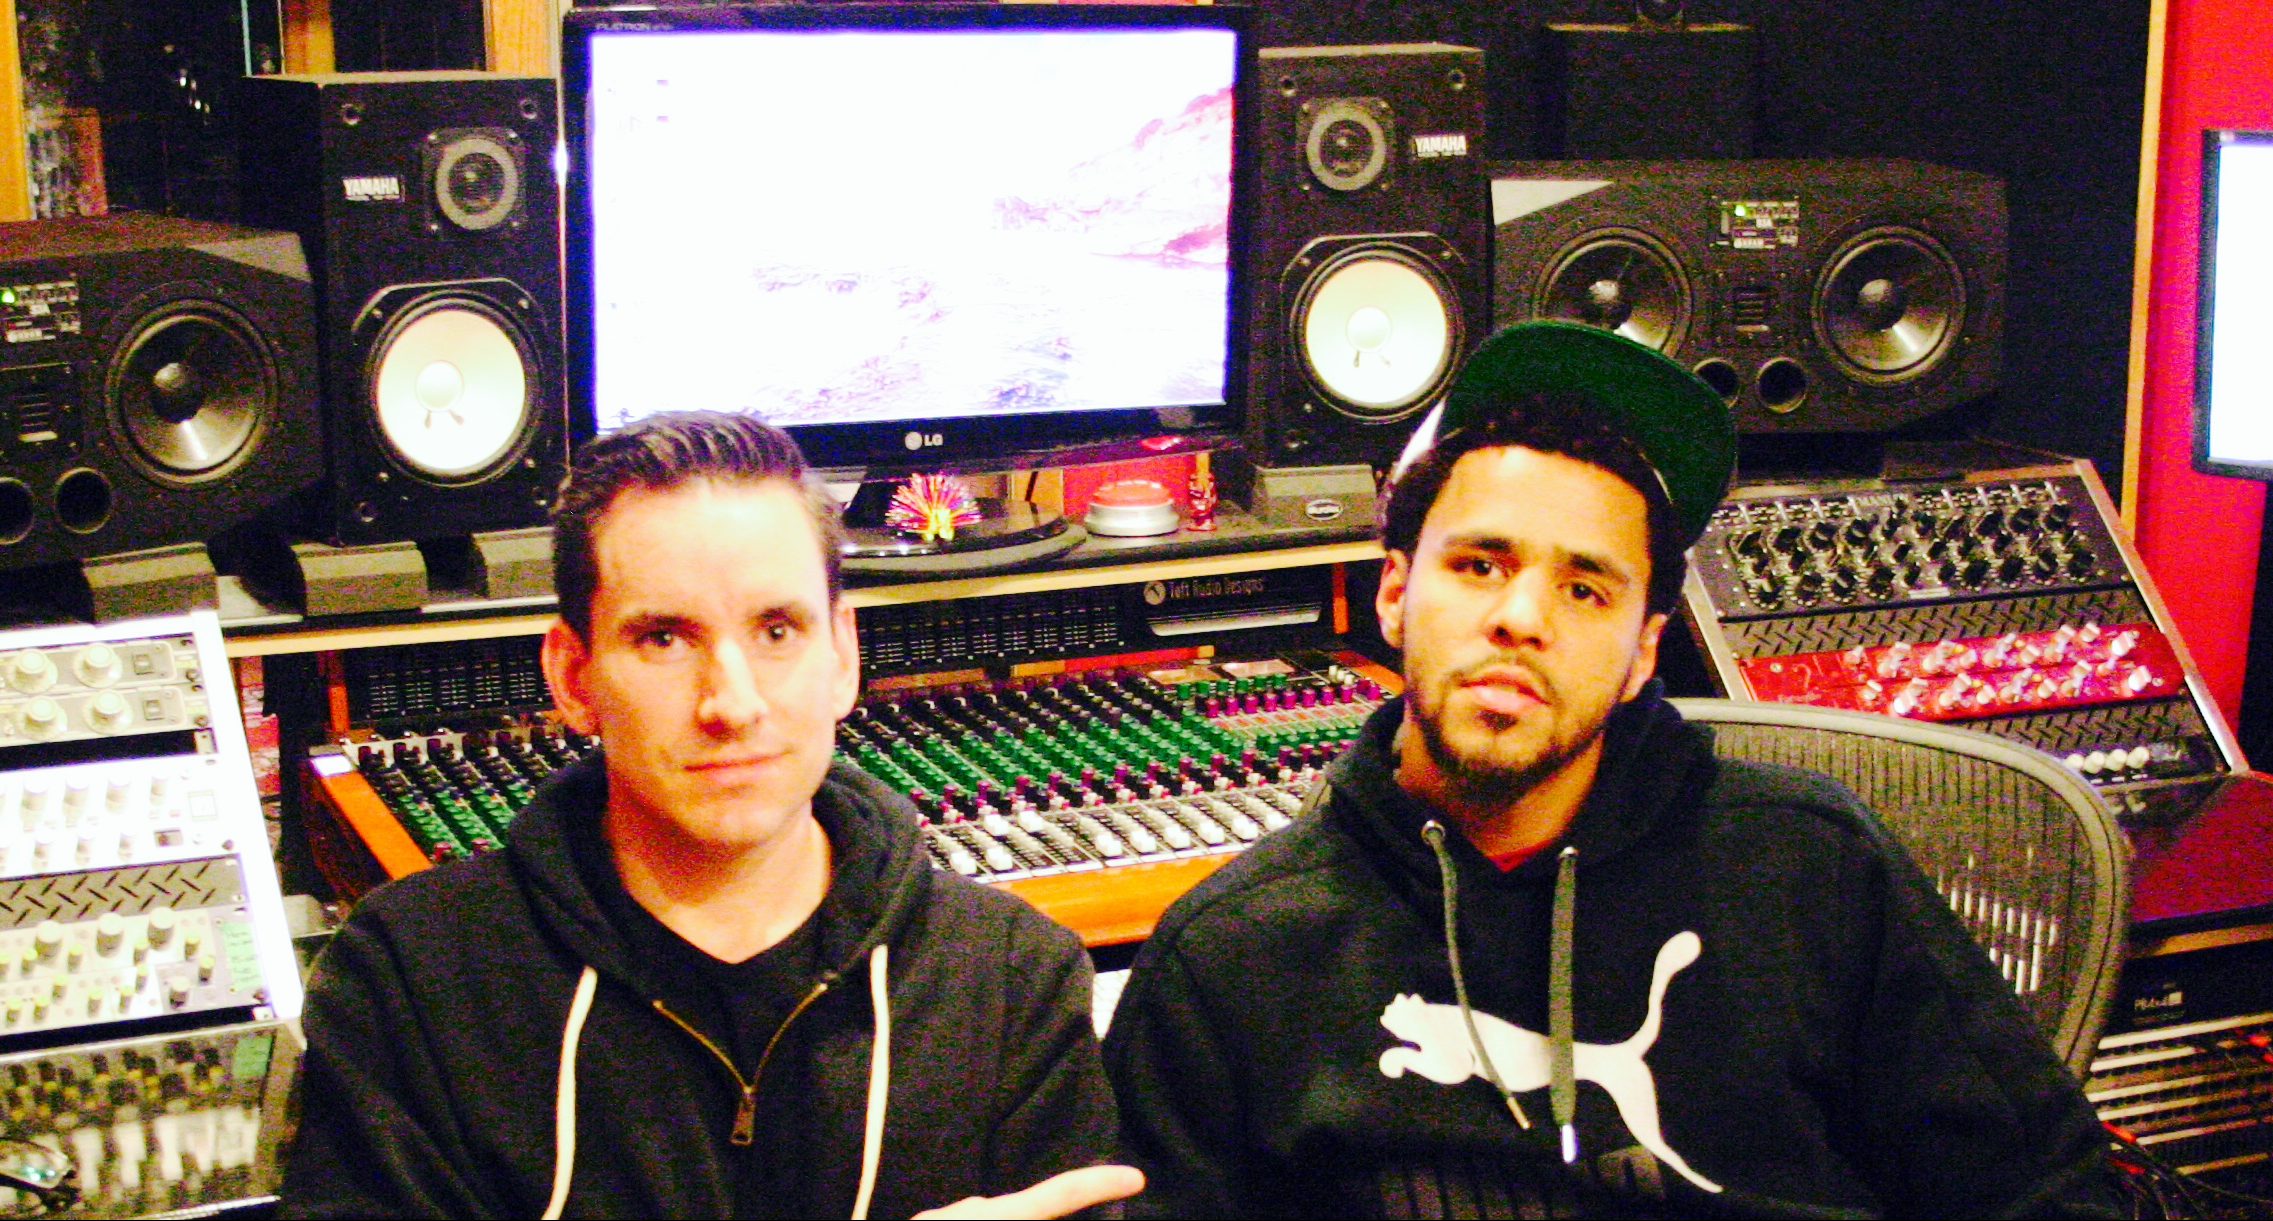 J Cole drops in for an amazing 2 day sessions to put down vocals for a few new tracks